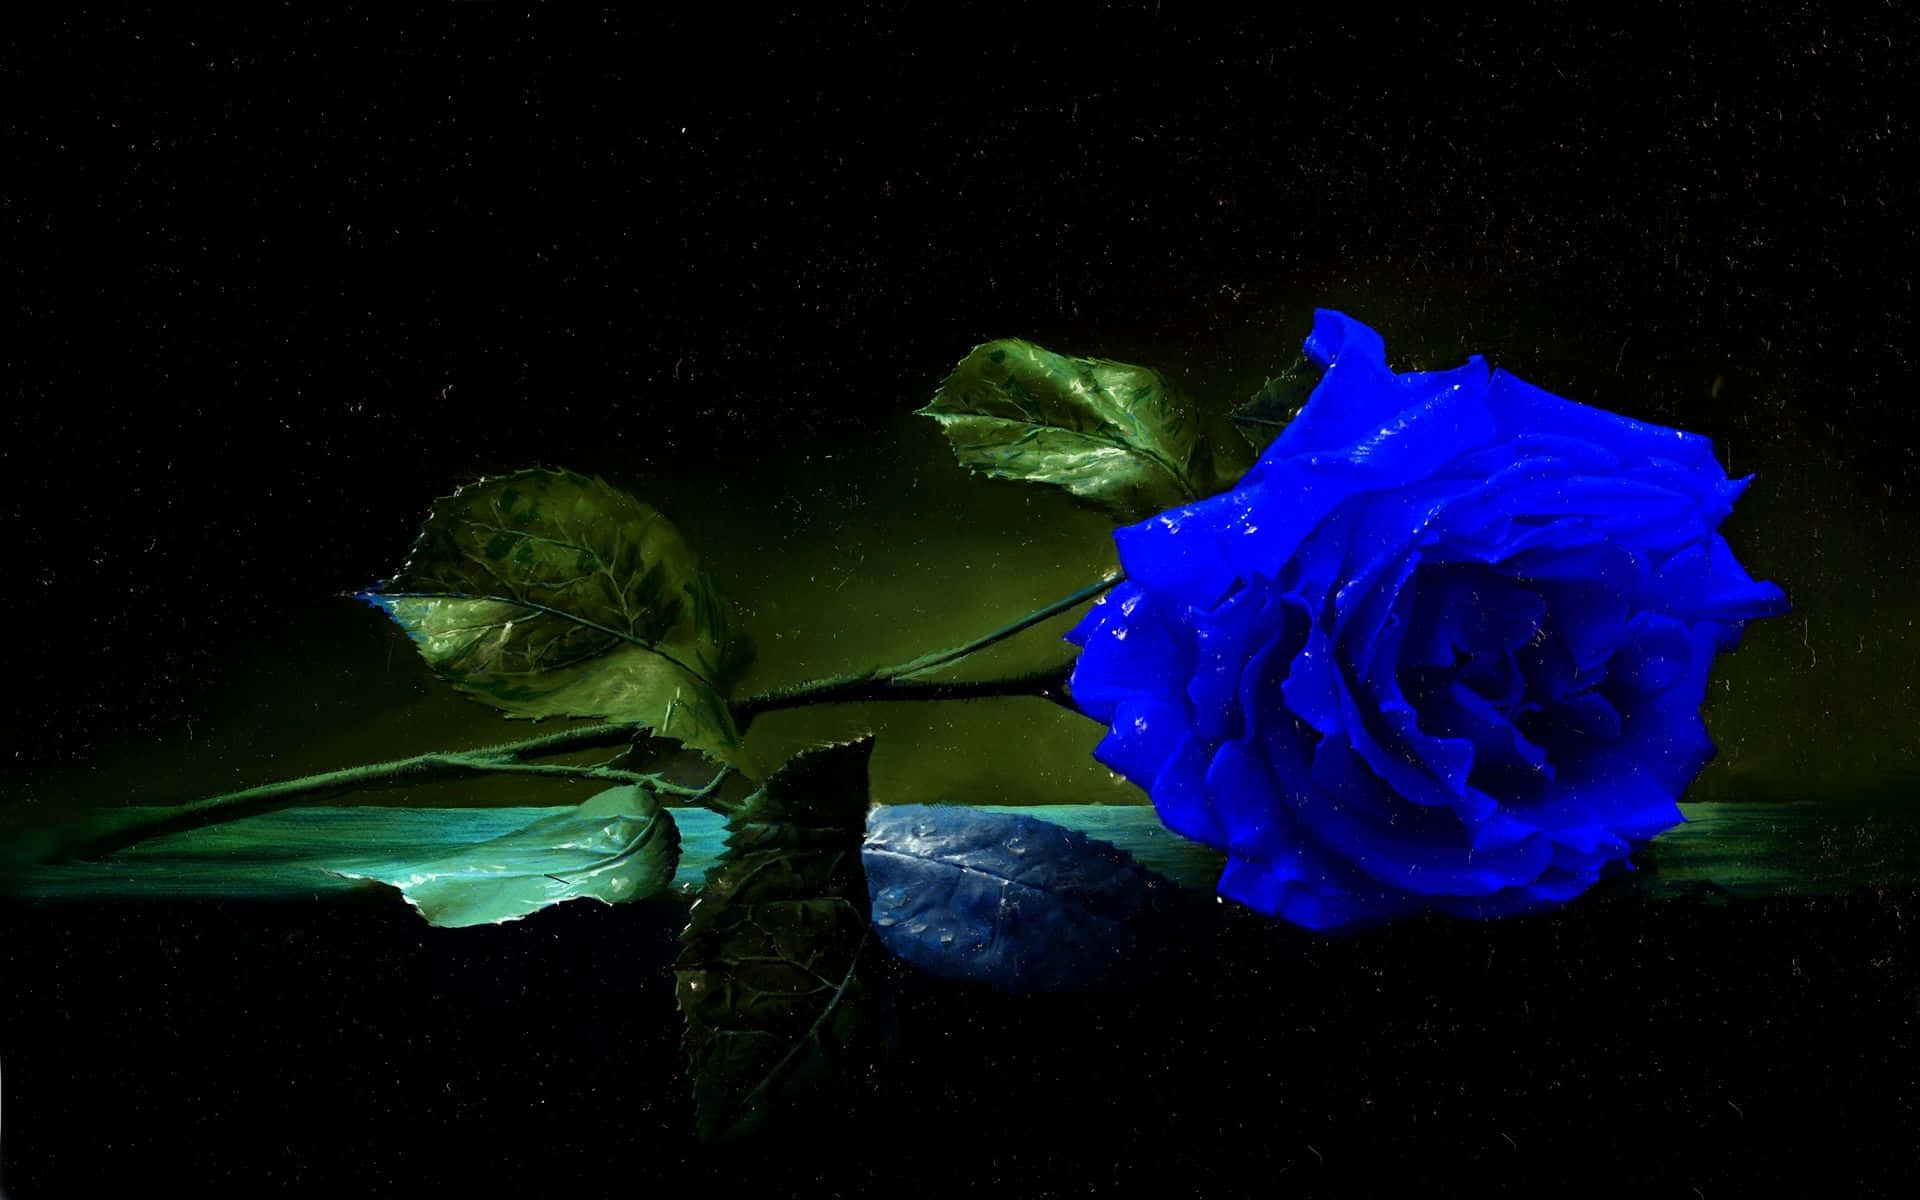 A stunning Blue Rose, symbolizing the rare and mysterious. Wallpaper